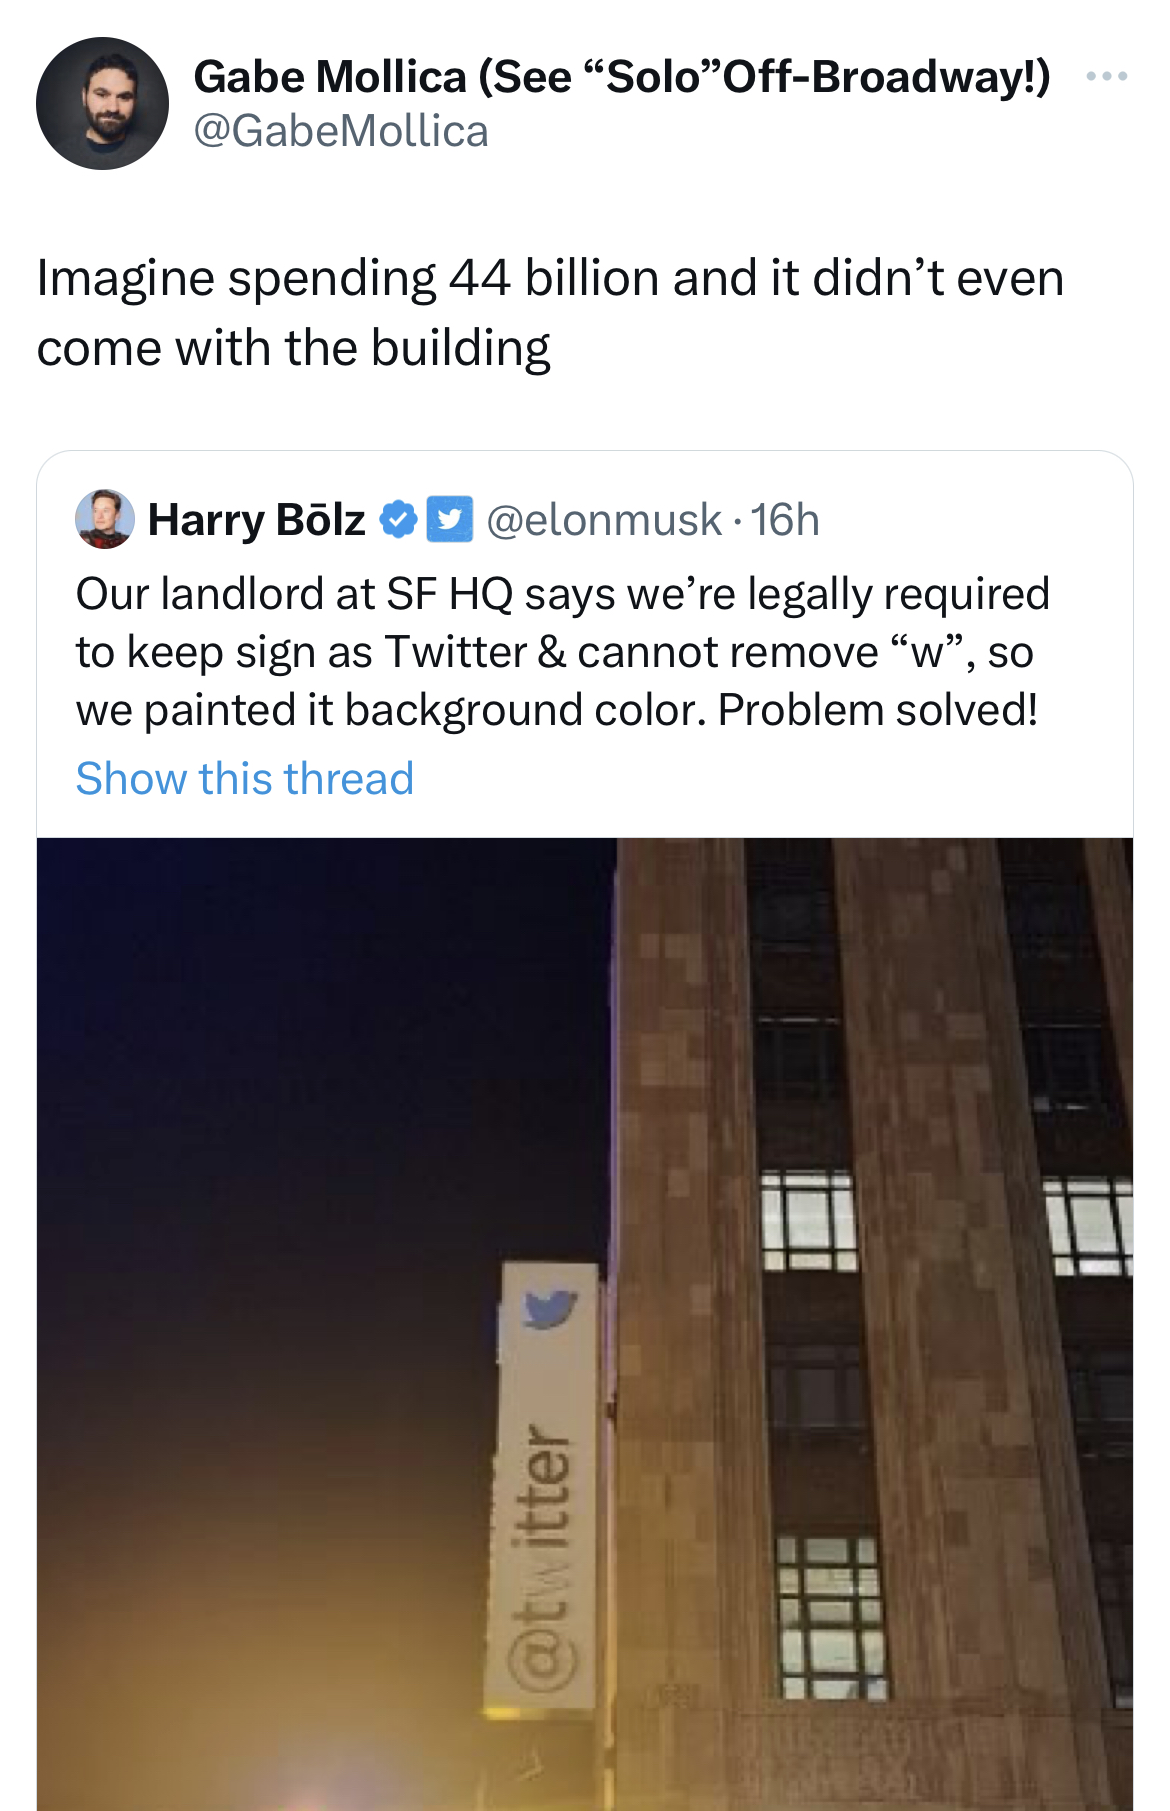 savage tweets - Gabe Mollica See "Solo"OffBroadway! Imagine spending 44 billion and it didn't even come with the building Harry Blz 16h Our landlord at Sf Hq says we're legally required to keep sign as Twitter & cannot remove "w", so we painted it backgro